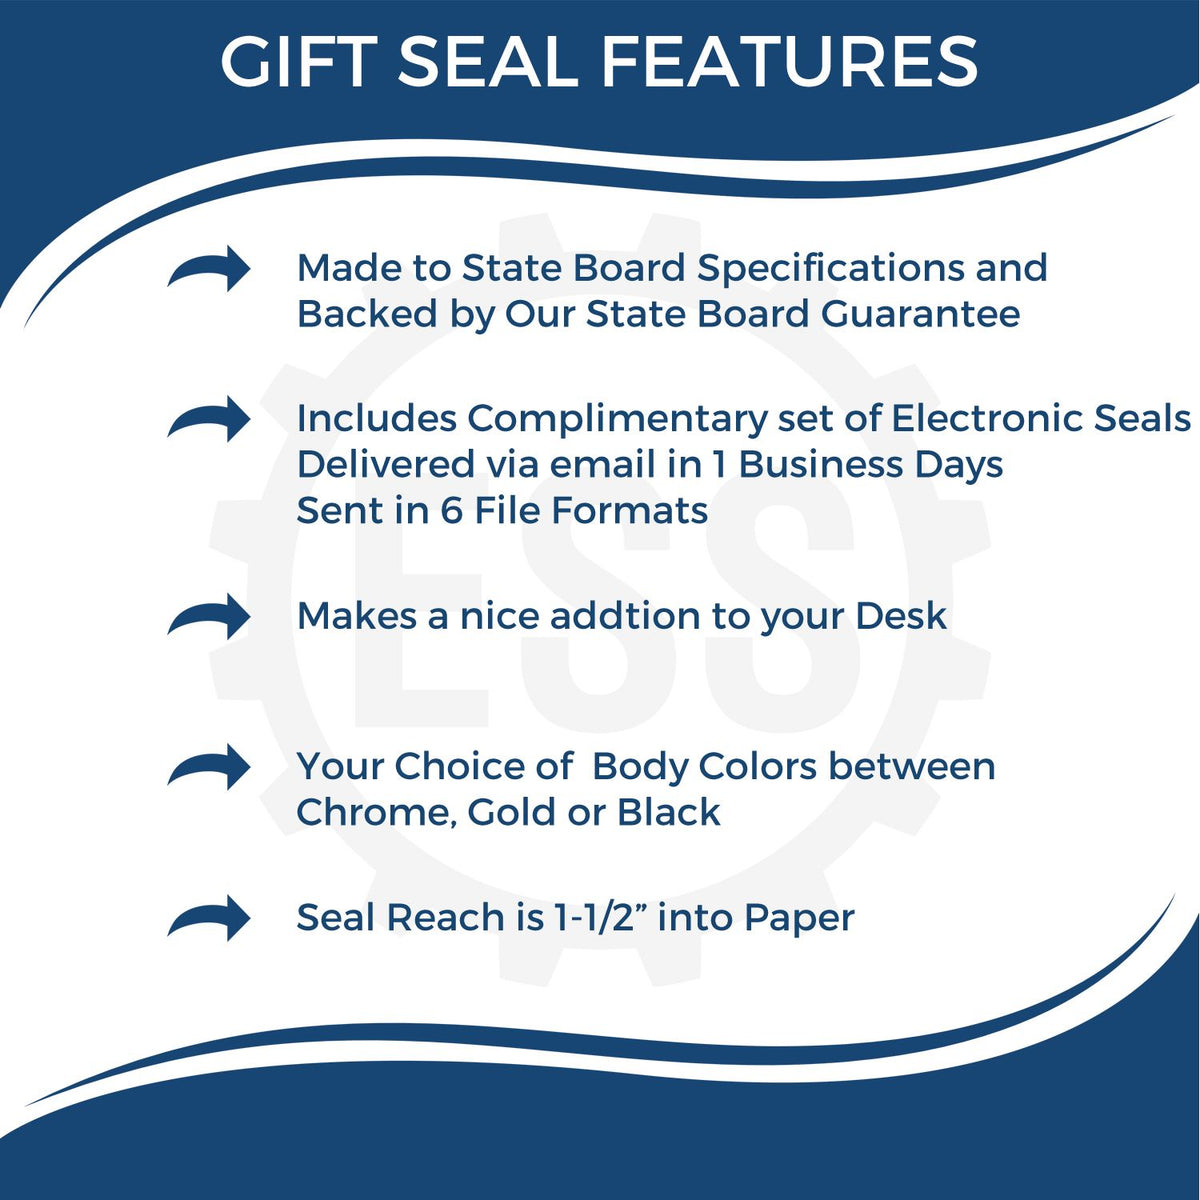 A picture of an infographic highlighting the selling points for the Gift New Jersey Architect Seal